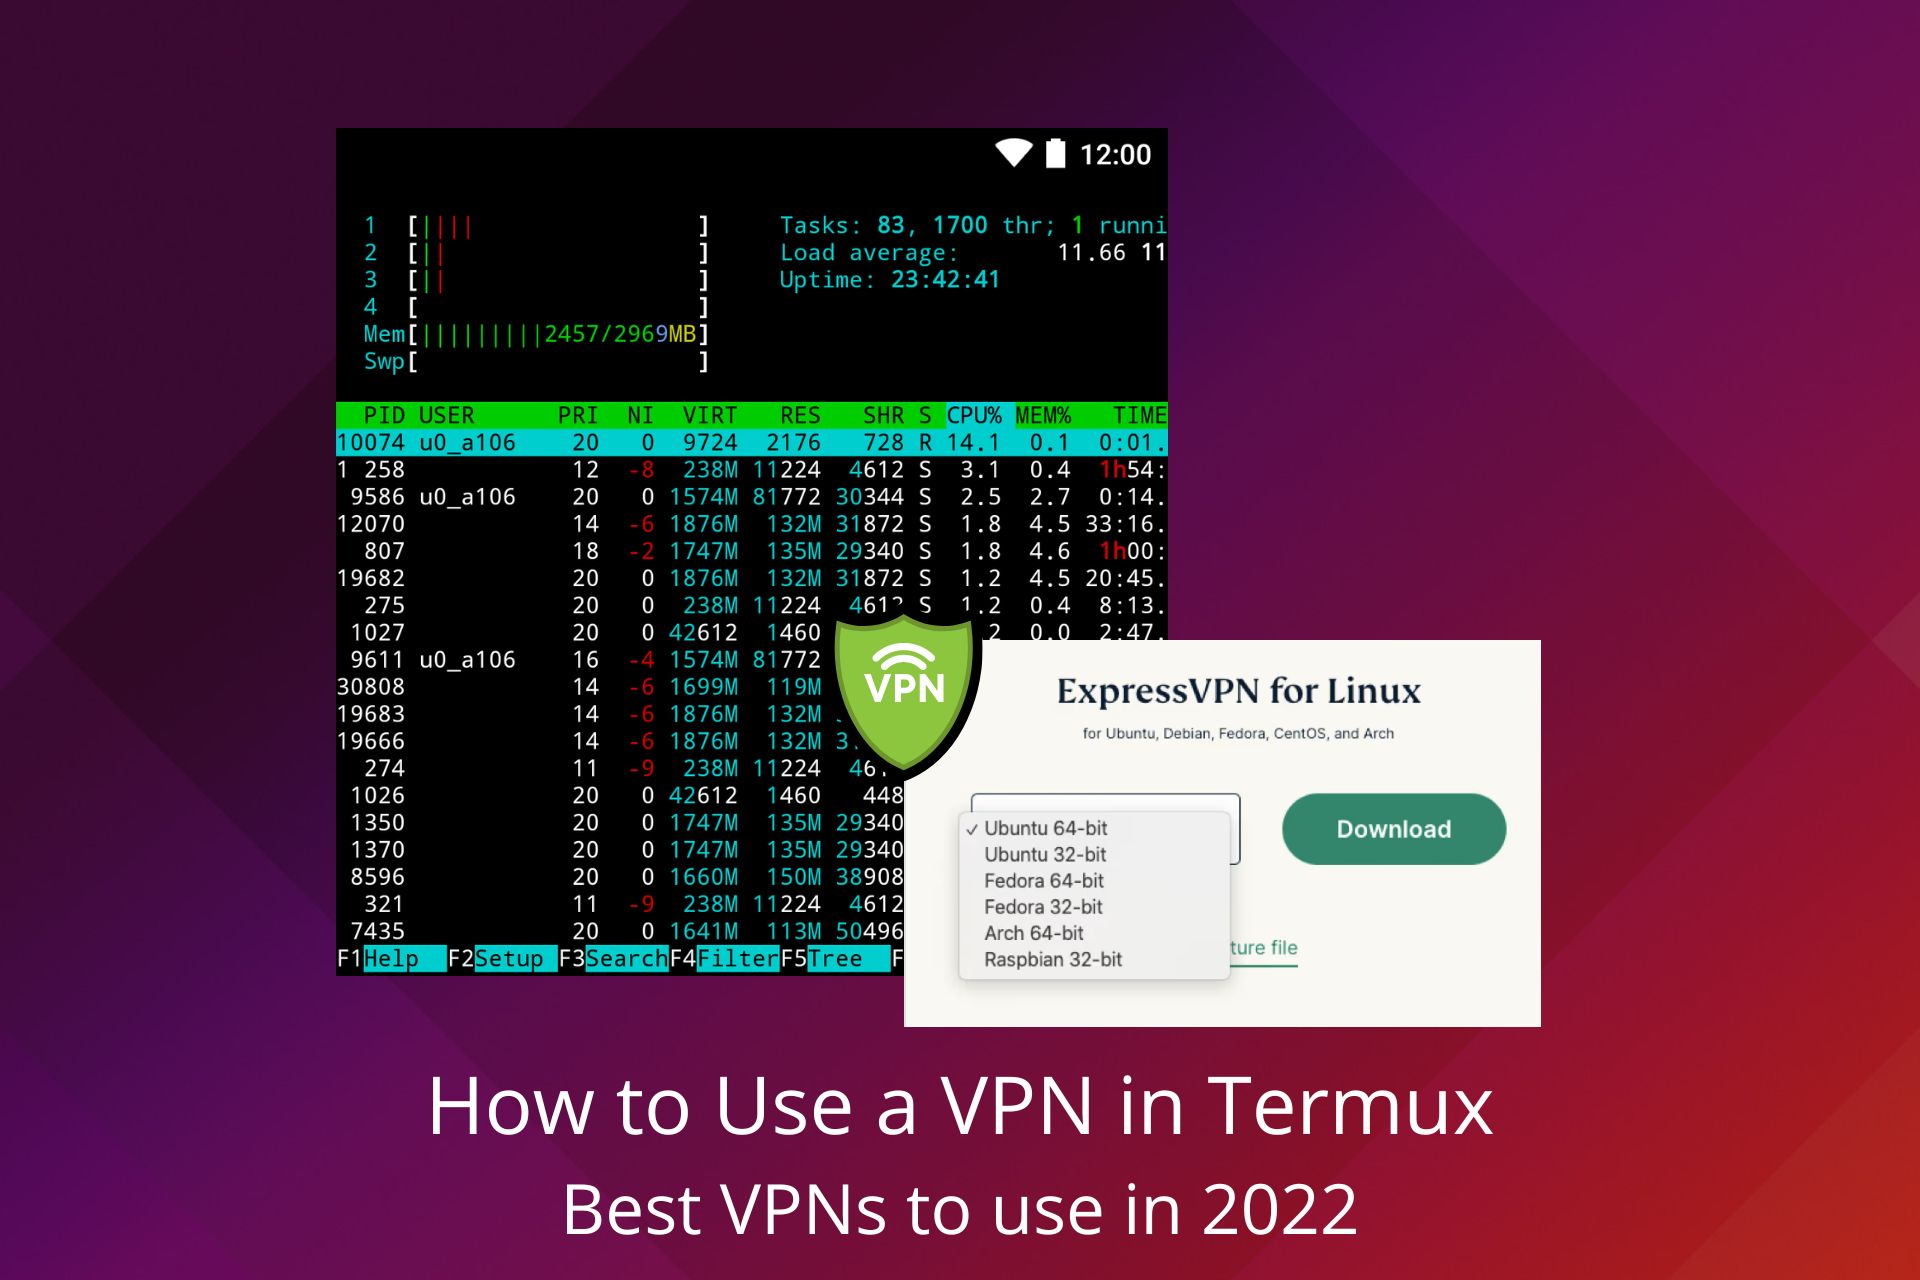 How to Use a VPN in Termux